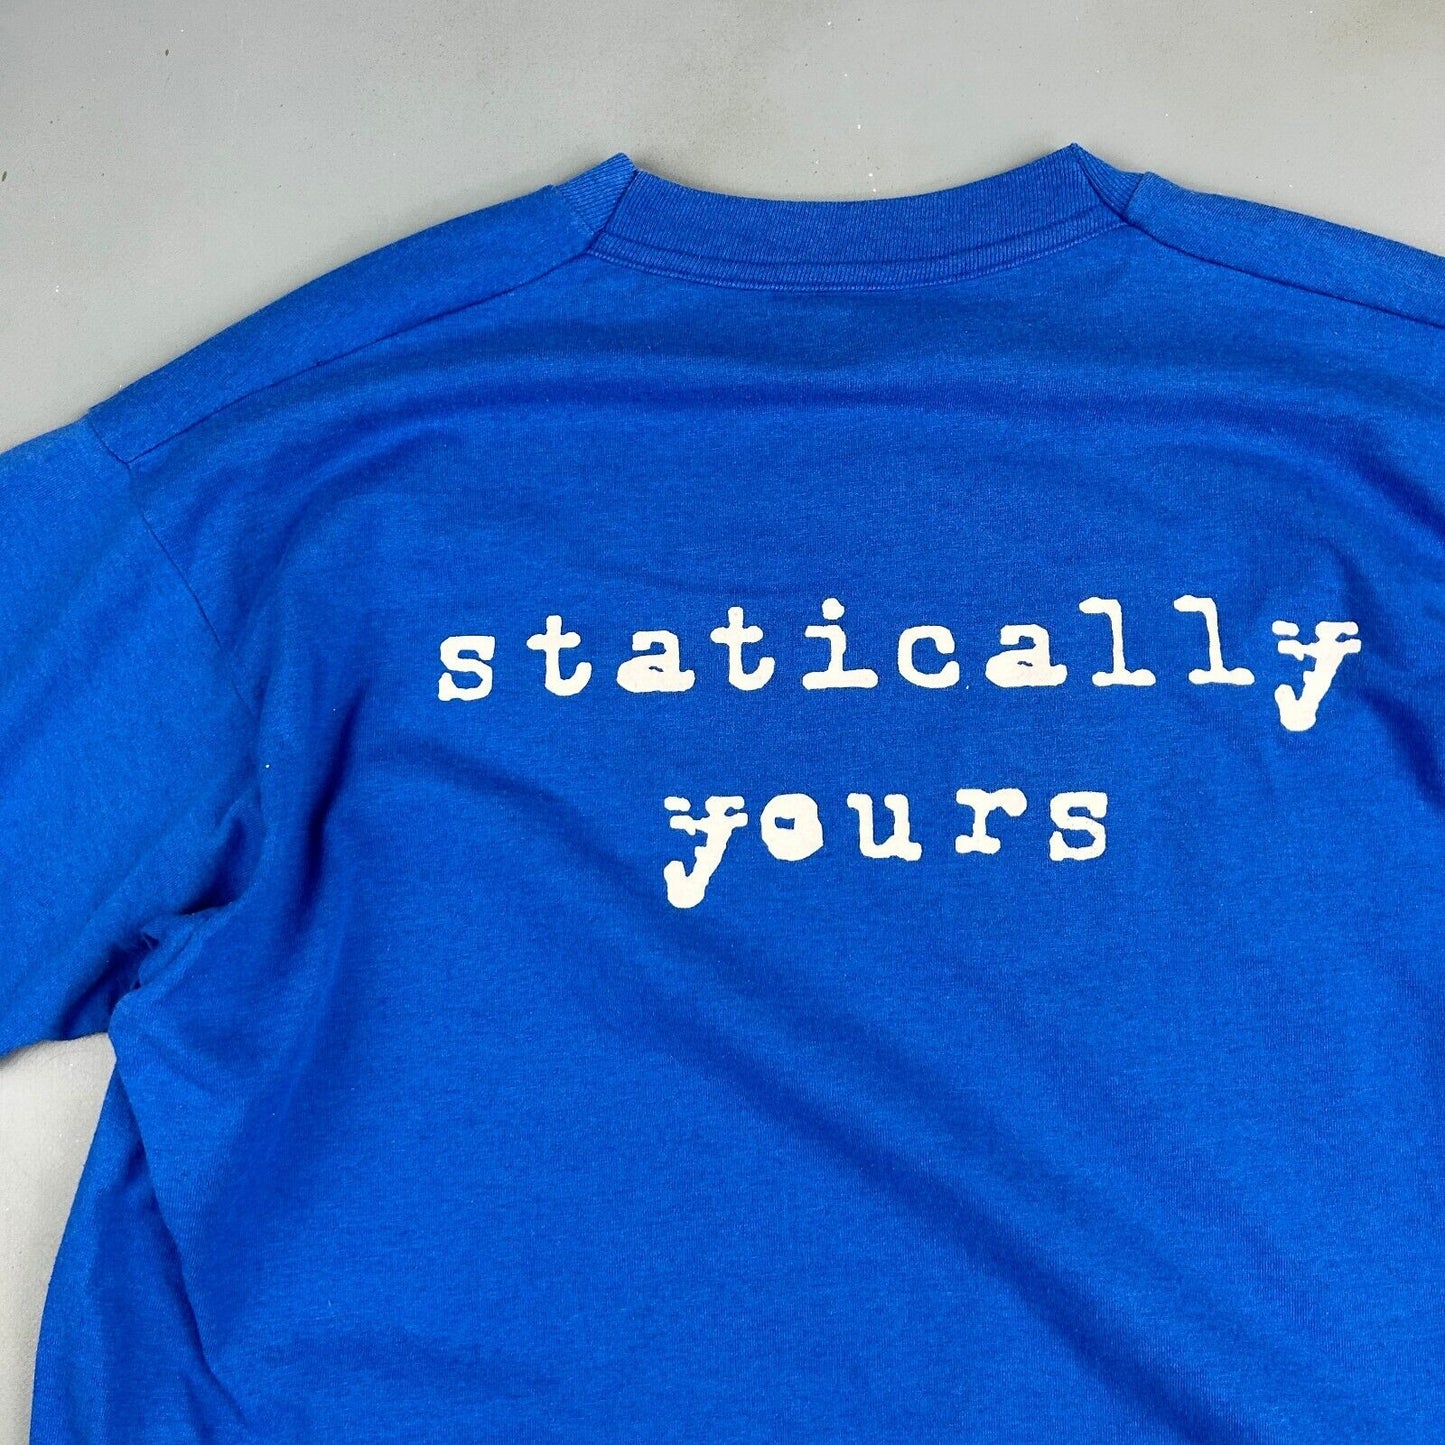 VINTAGE 90s | Grovel Statically Yours Band T-Shirt sz XL Men Adult